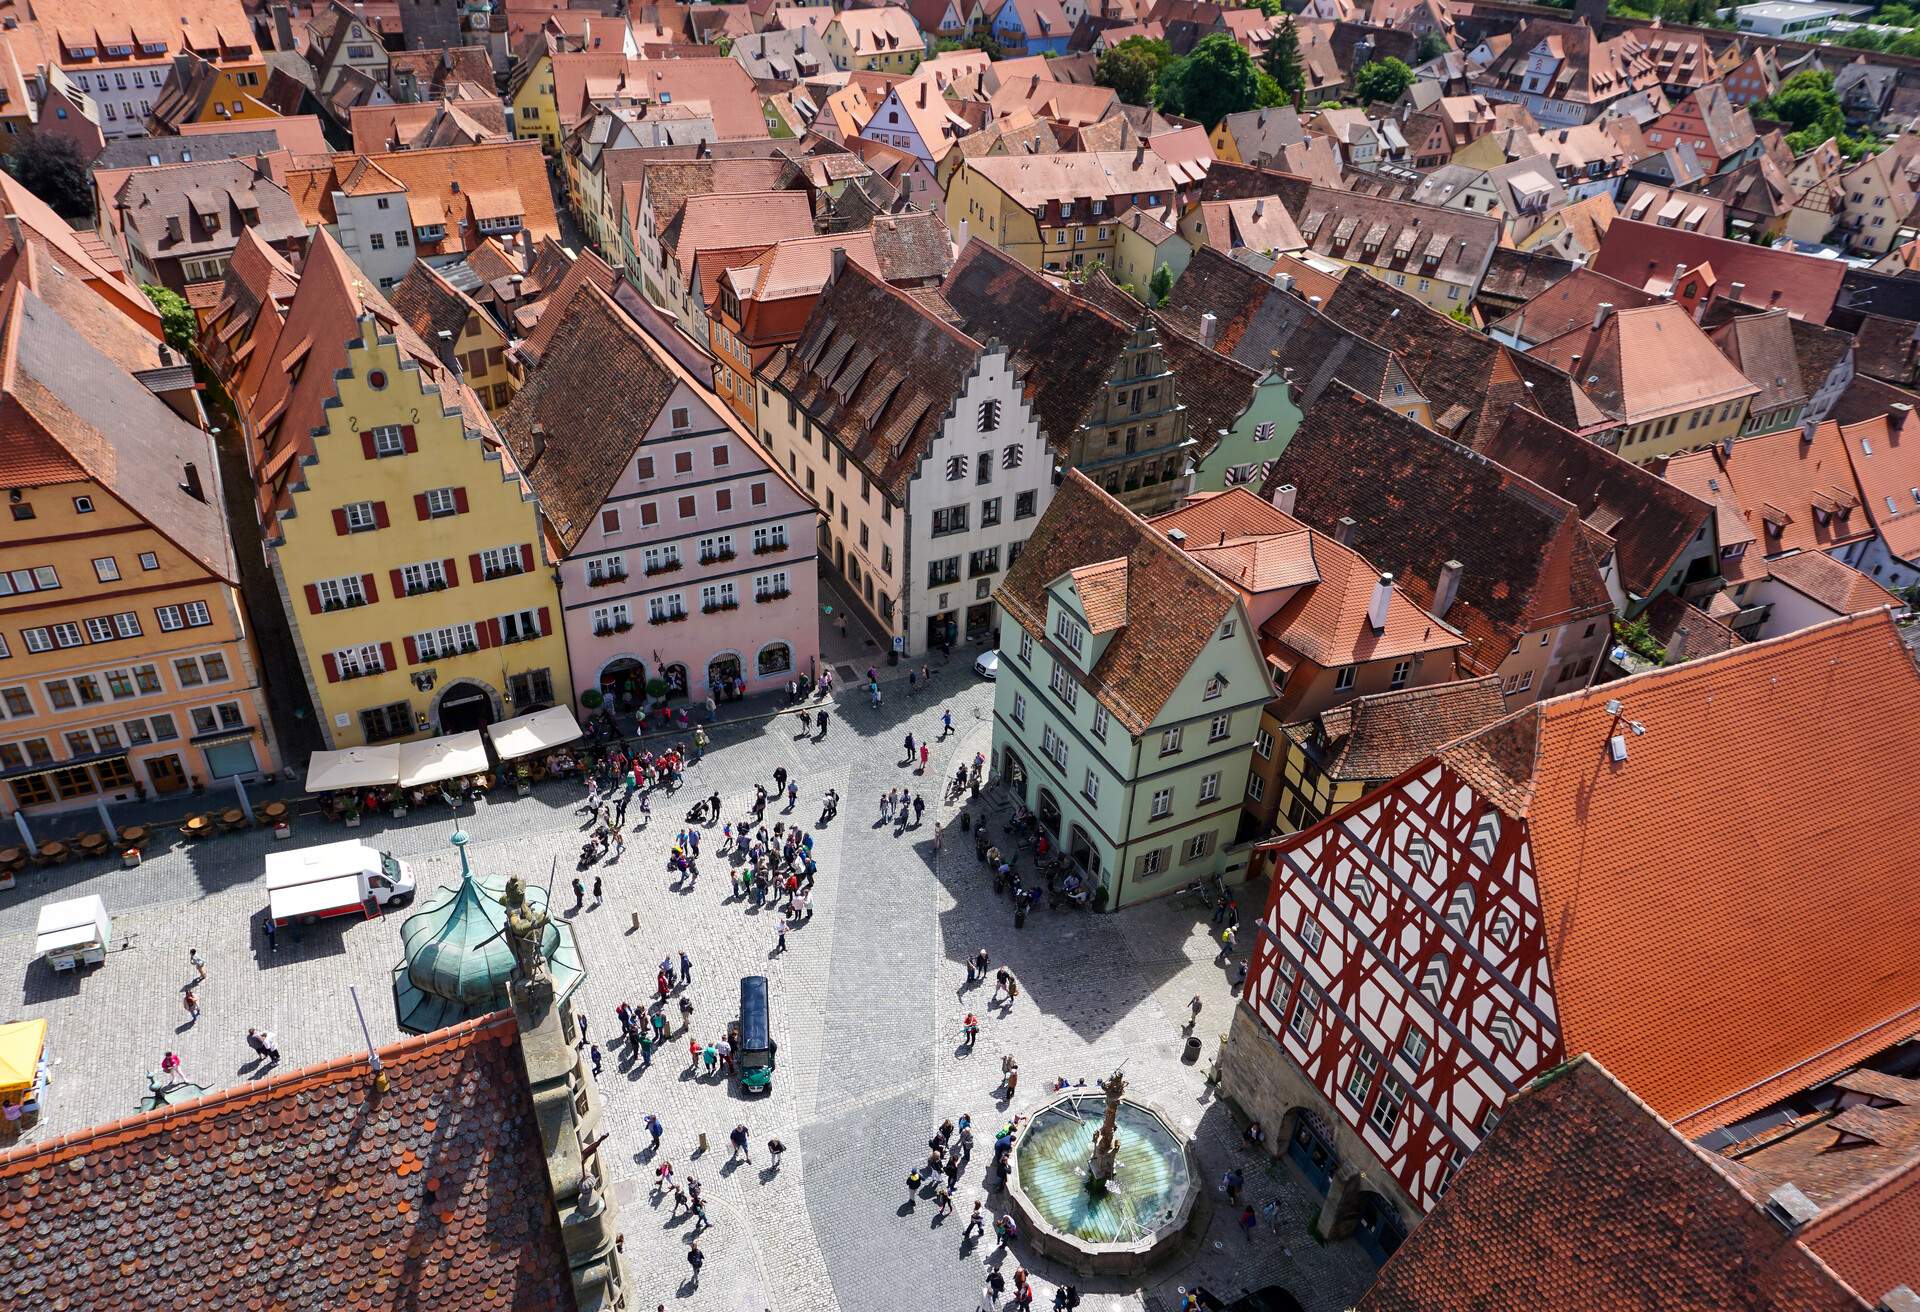 View of the main square from town hall tower in Rothenburg ob der Tauber